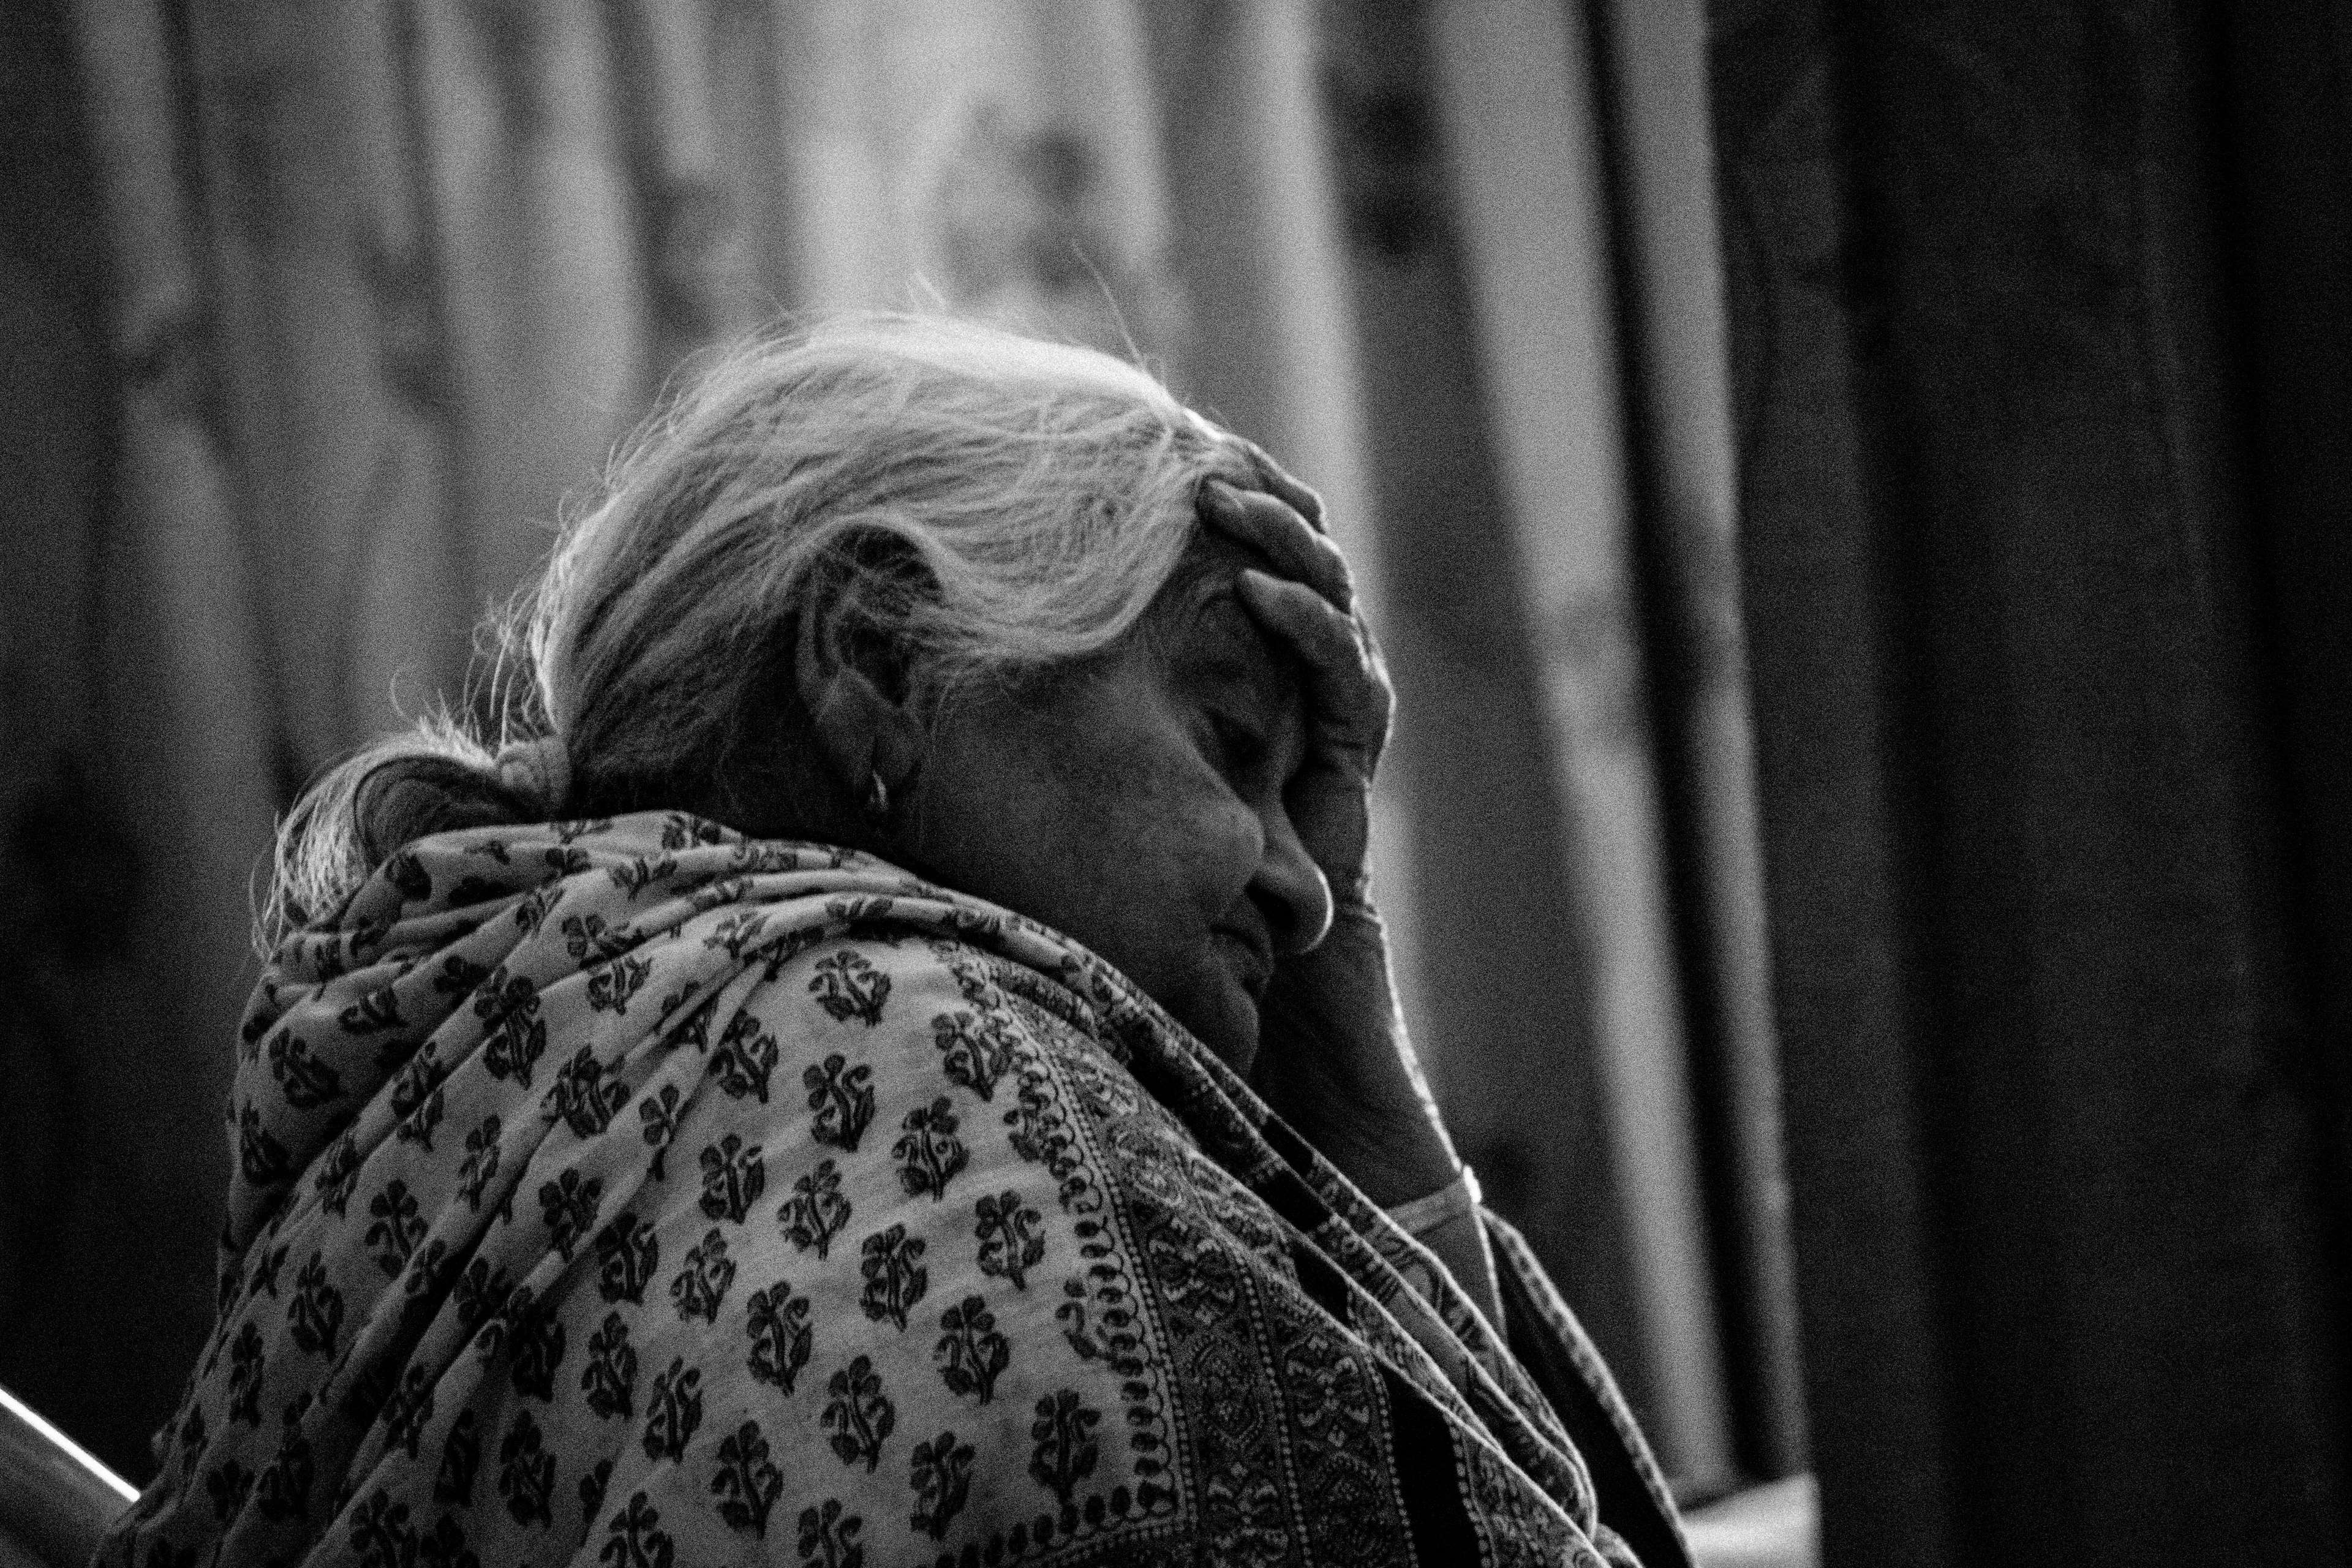 black and white, elderly, frustrated, frustration, grandma, grandmother, old, person, poverty, sad, stress, unhappy, woman 4k wallpaper. Mocah.org HD Desktop Wallpaper